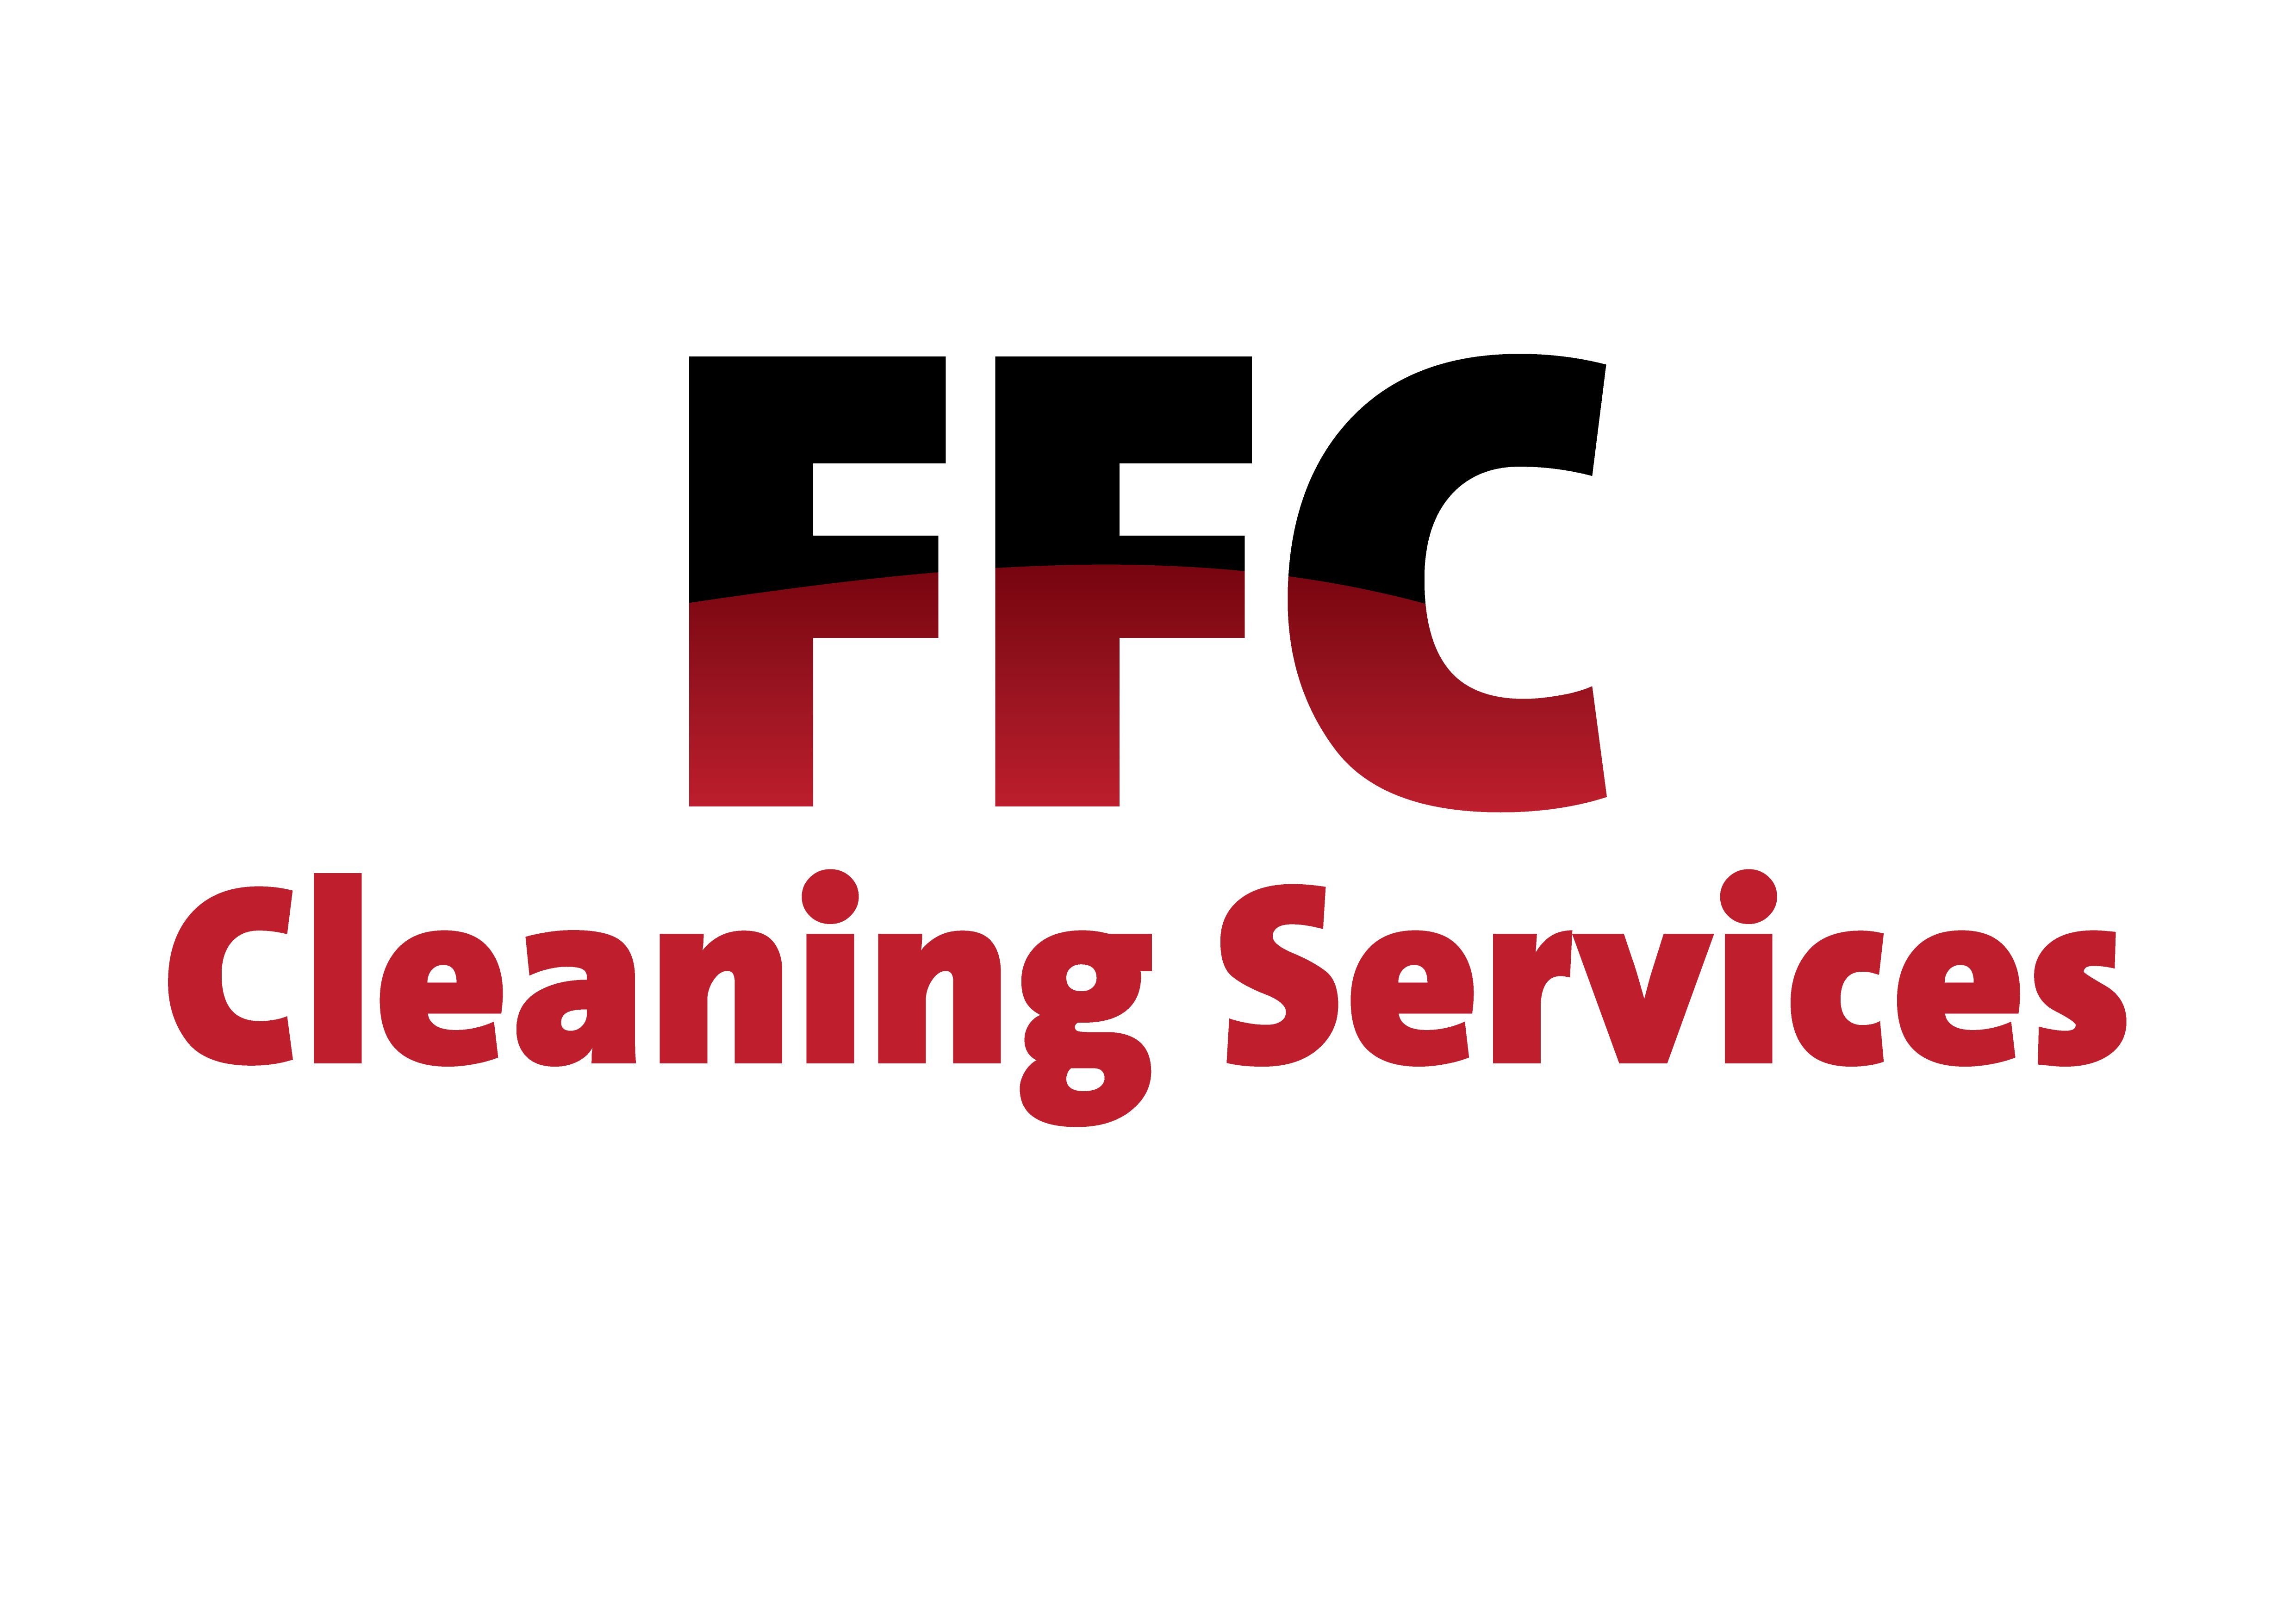 FFC Cleaning Services Ltd